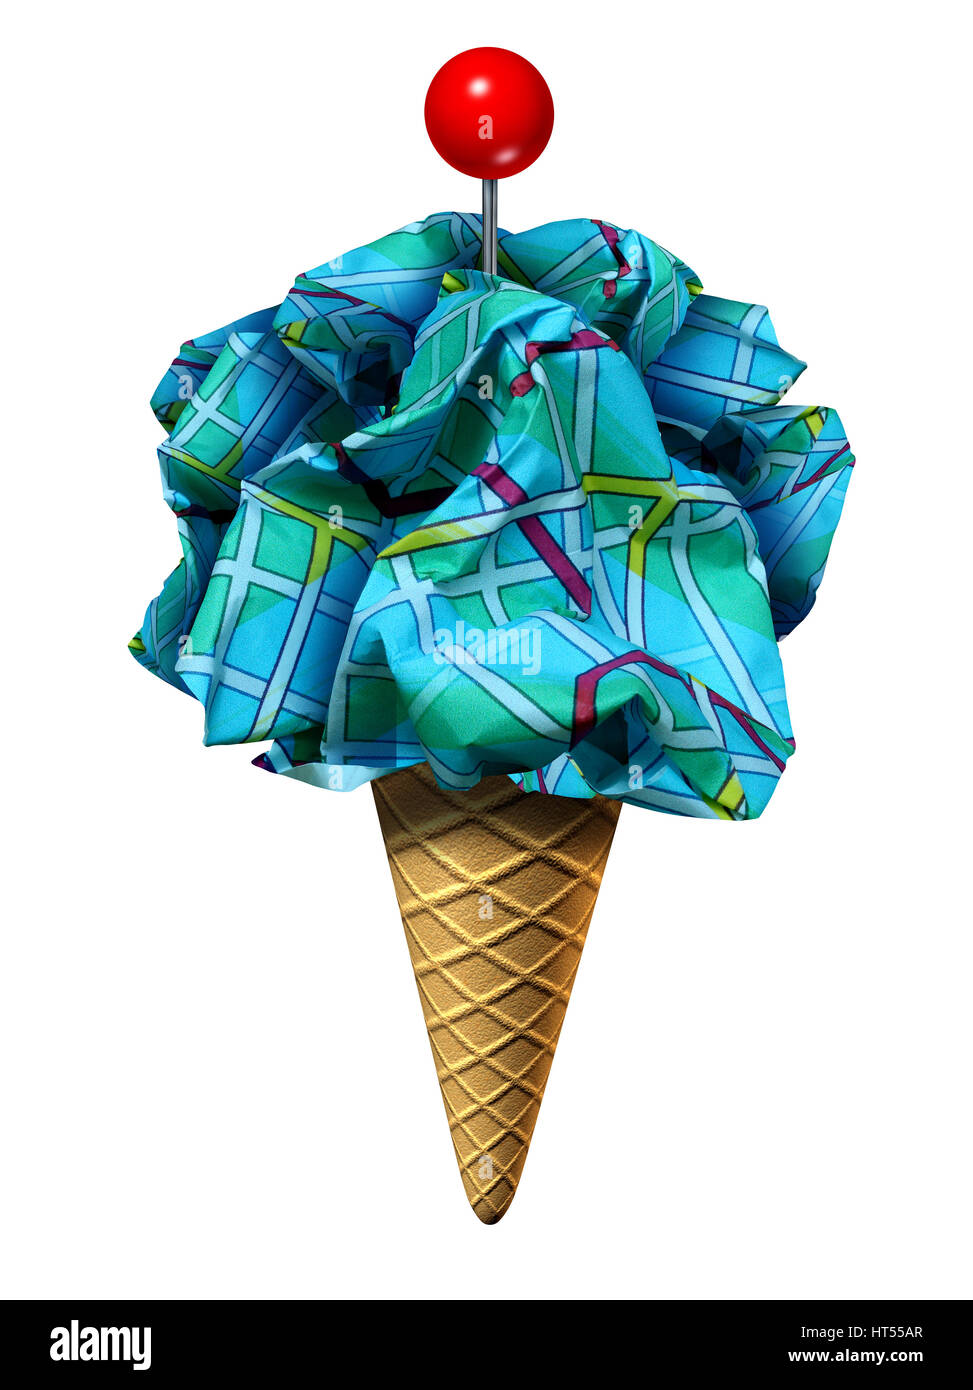 Summer travel symbol and seasonal driving vacation as an ice cream cone holding a group of crumpled paper maps shaped as ice cream. Stock Photo